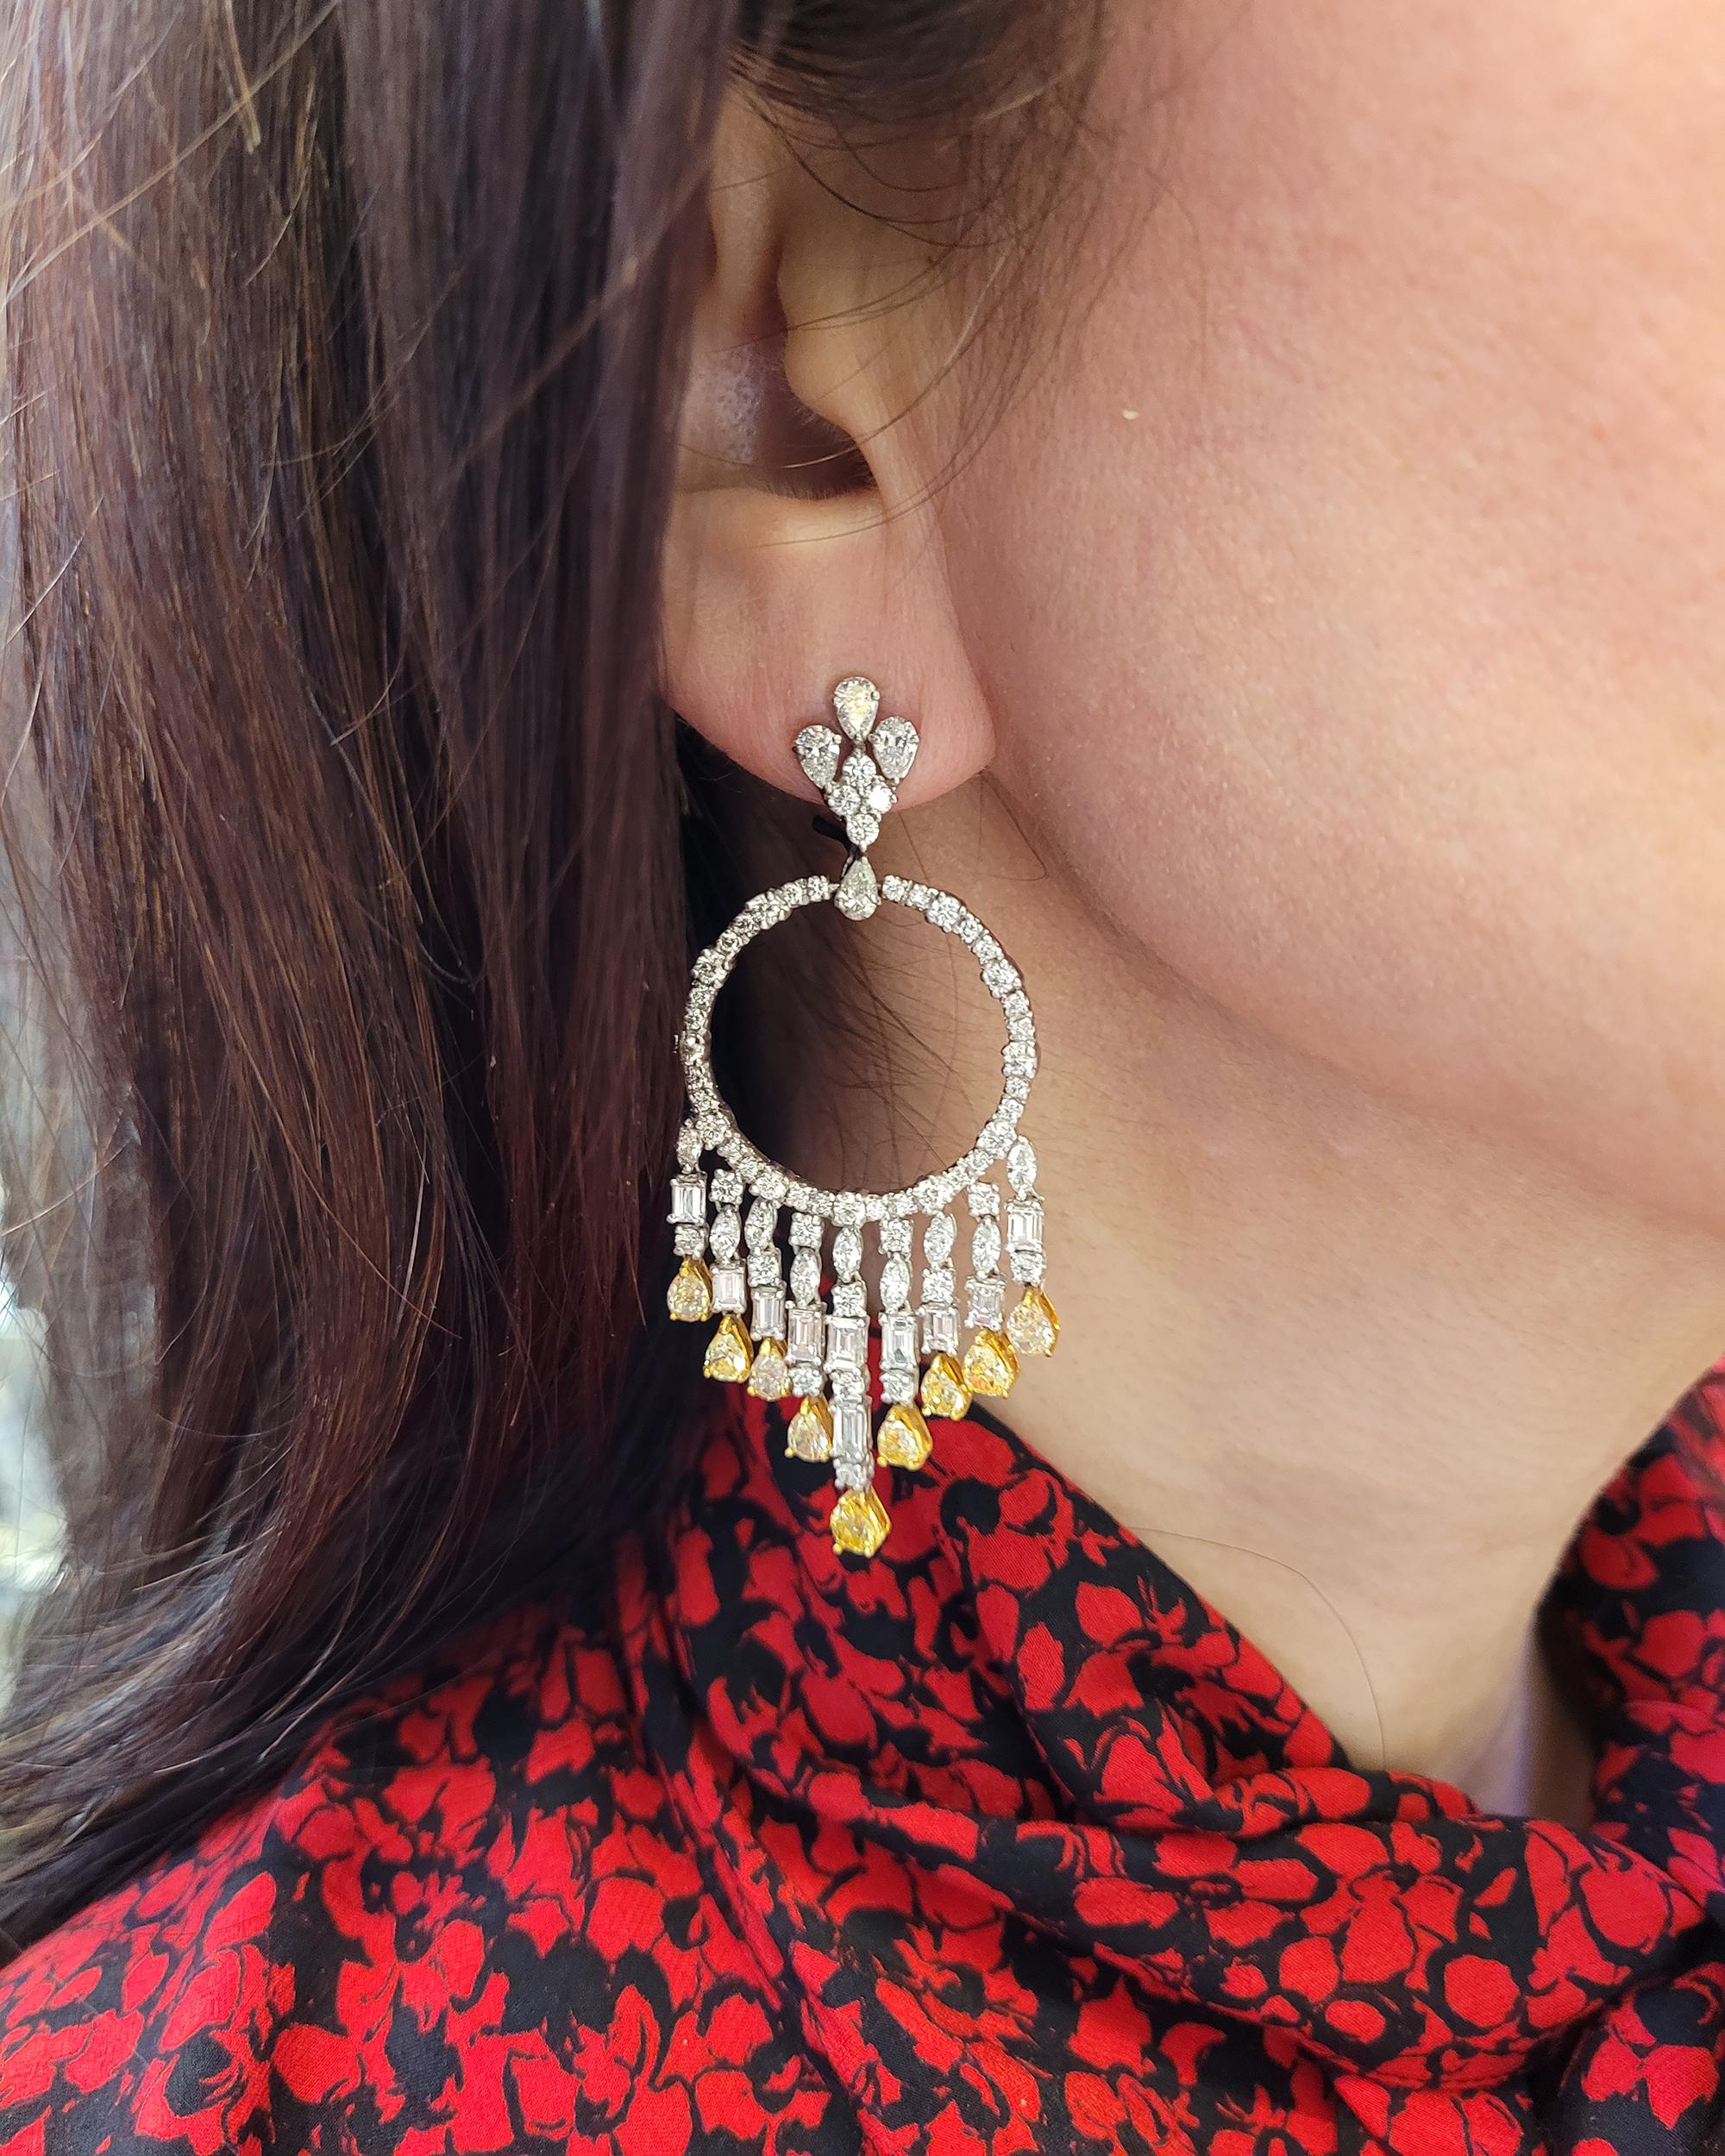 This chandelier earring design is the culmination of the two most timeless earring designs throughout the centuries. The classic hoop variation dates back to around 2500 B.C., and the chandelier rose in popularity as far back as the 18th century.